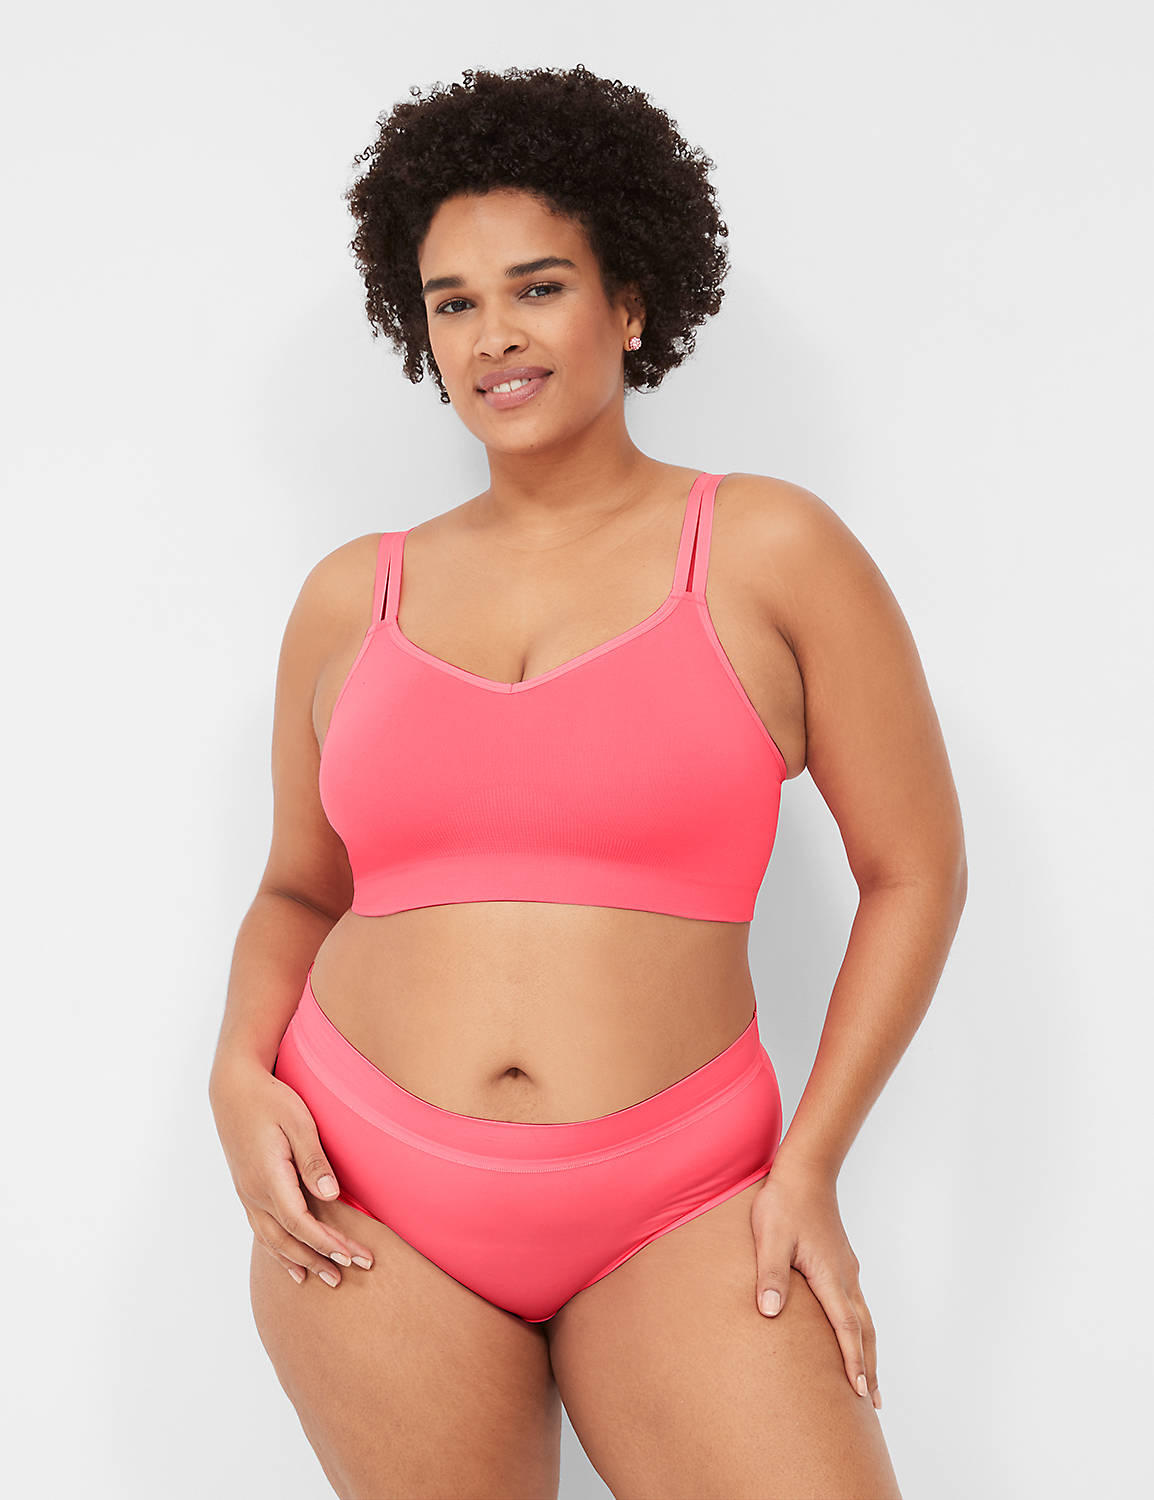 Strappy Seamless Bralette 1138675-S Product Image 1